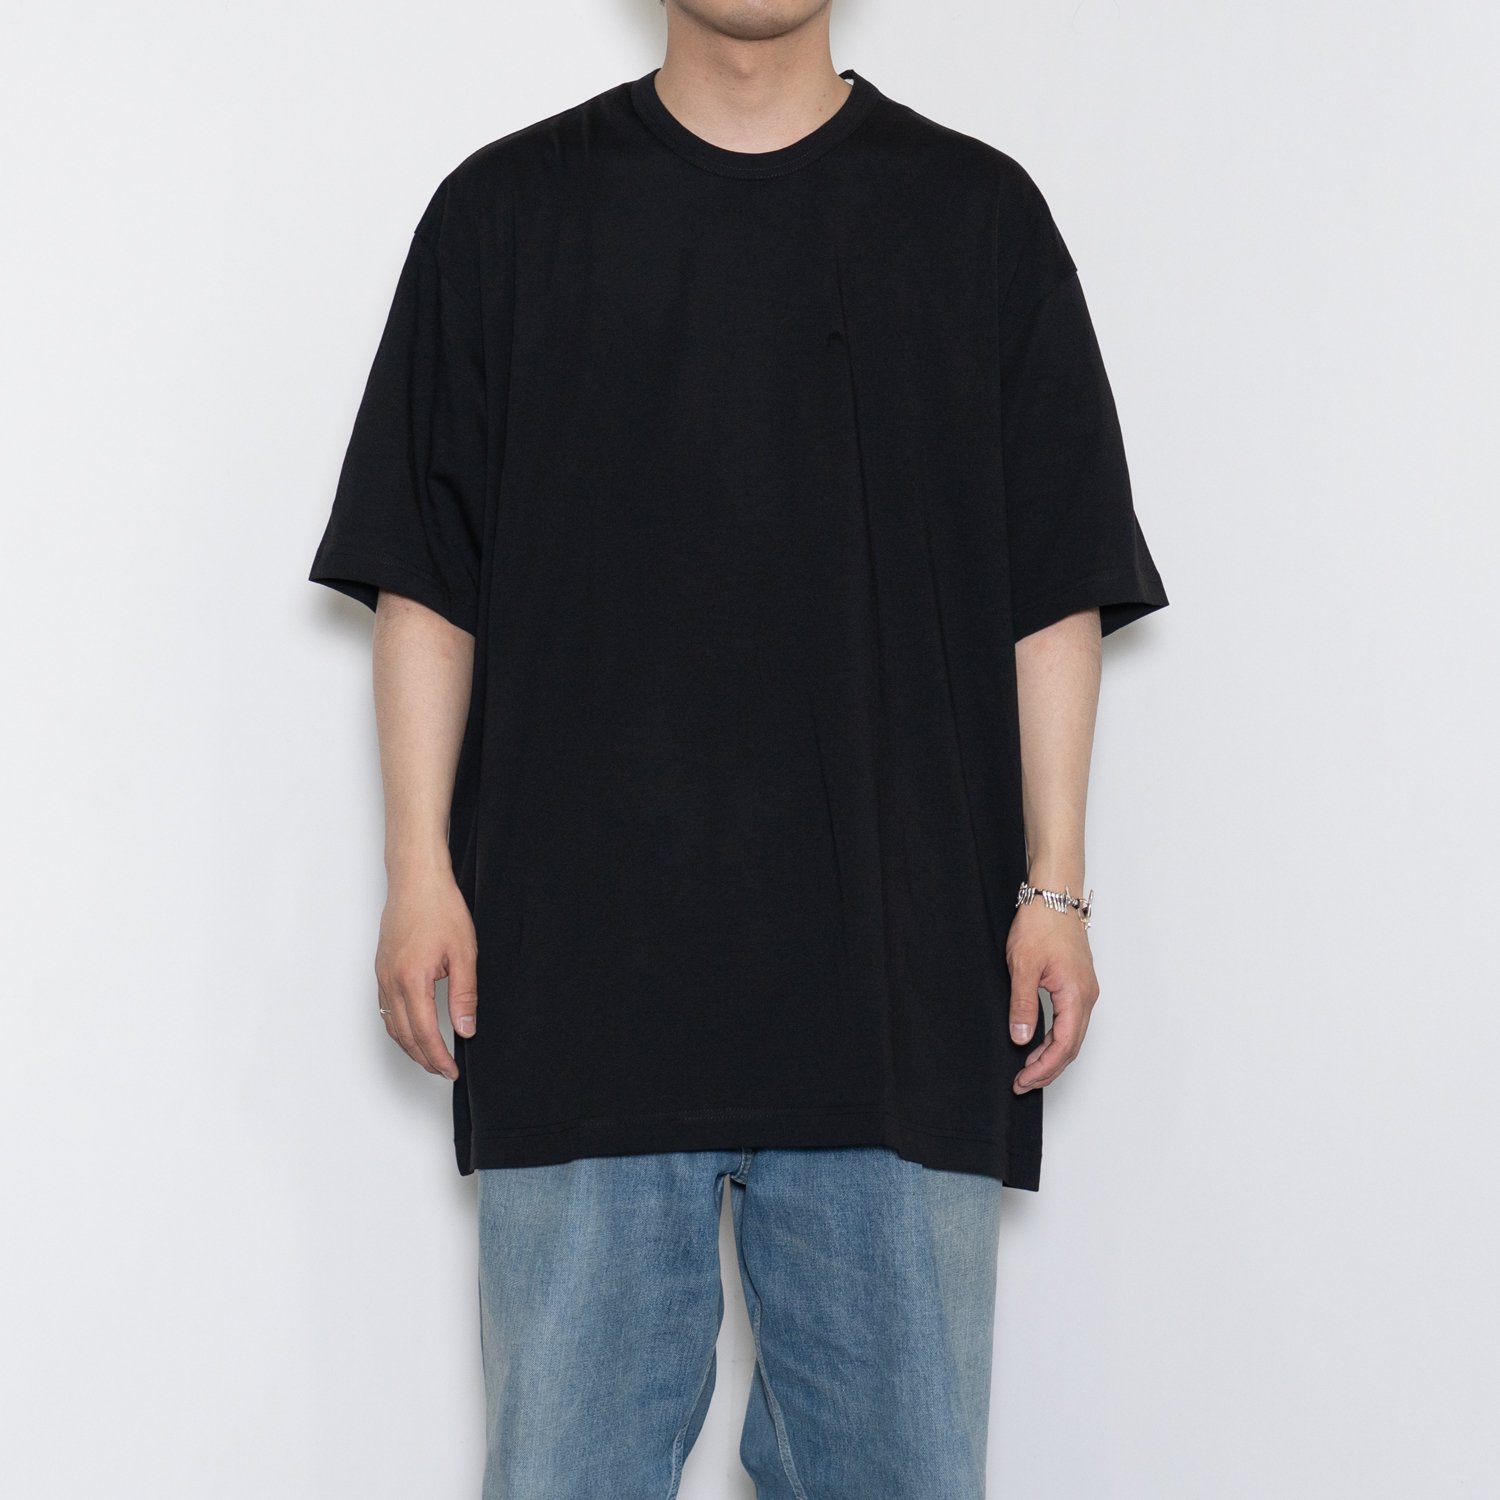 COMME des GARCONS SHIRT * 23SS COLLECTION Oversized Tee w/ back logo(4色展開)